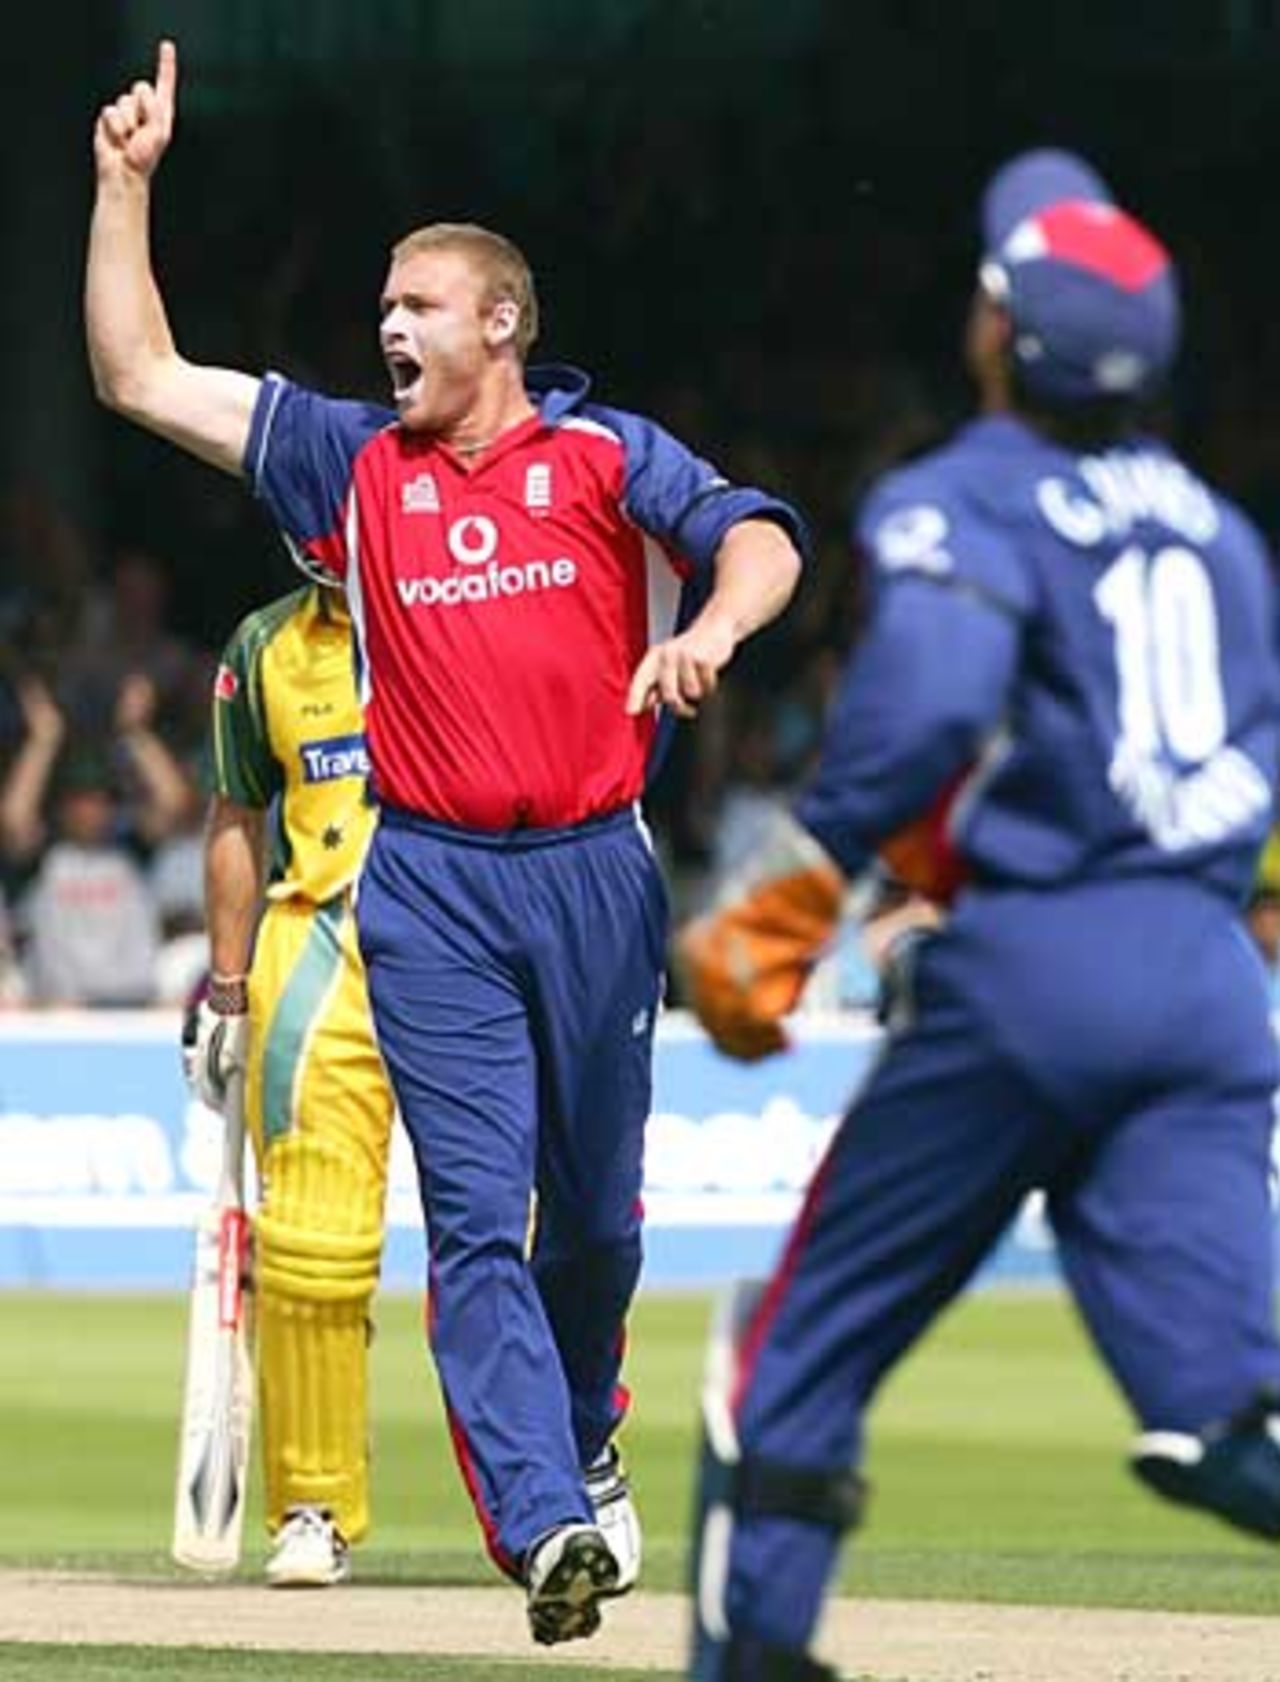 Andrew Flintoff has Adam Gilchrist caught behind, England v Australia, NatWest Challenge, Lord's, July 10